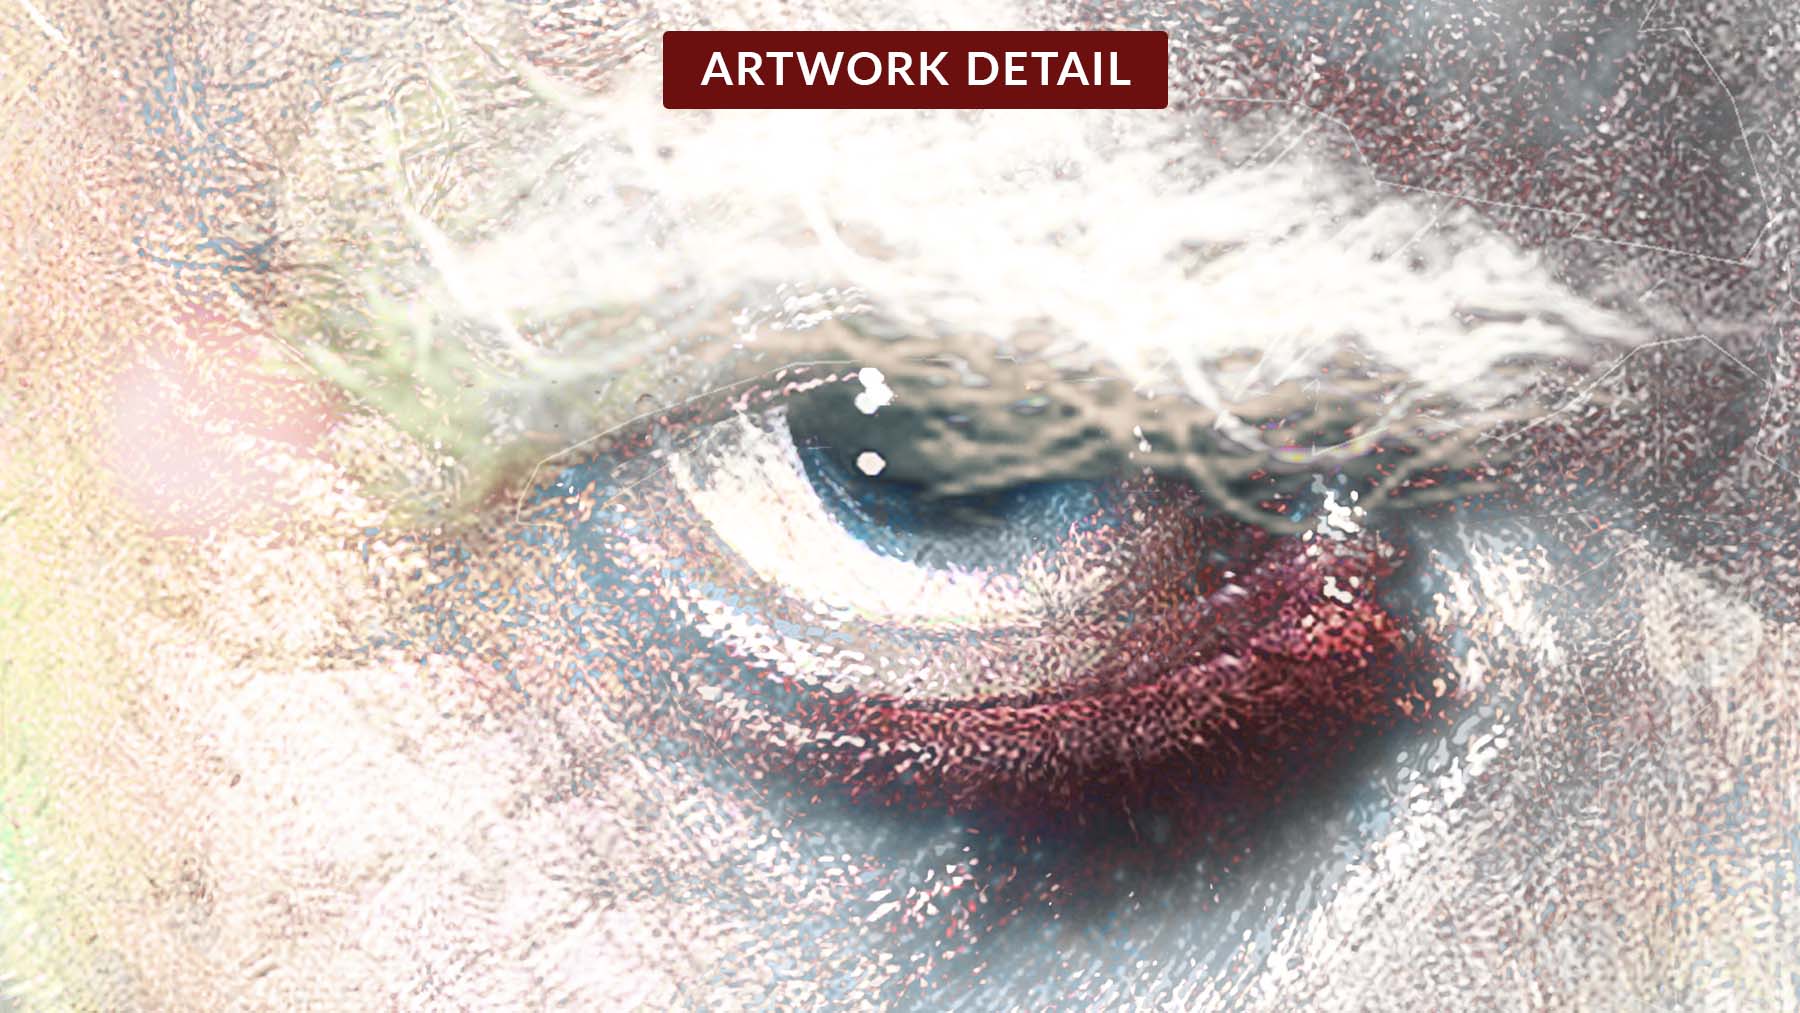 Eye detail from The Monster NFT collectible artwork